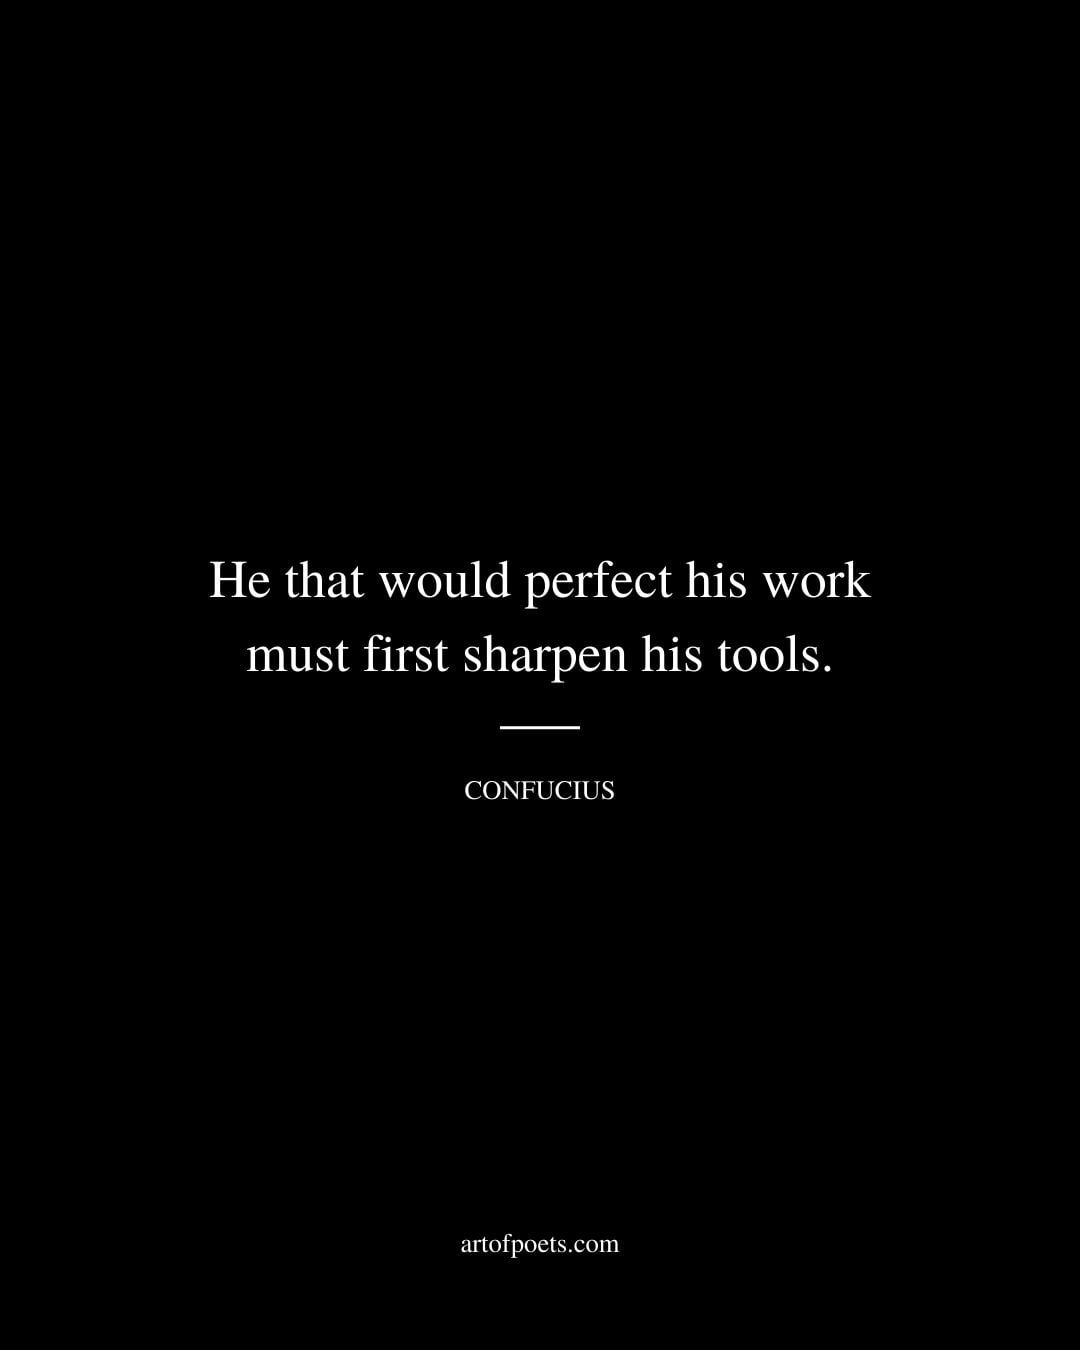 He that would perfect his work must first sharpen his tools